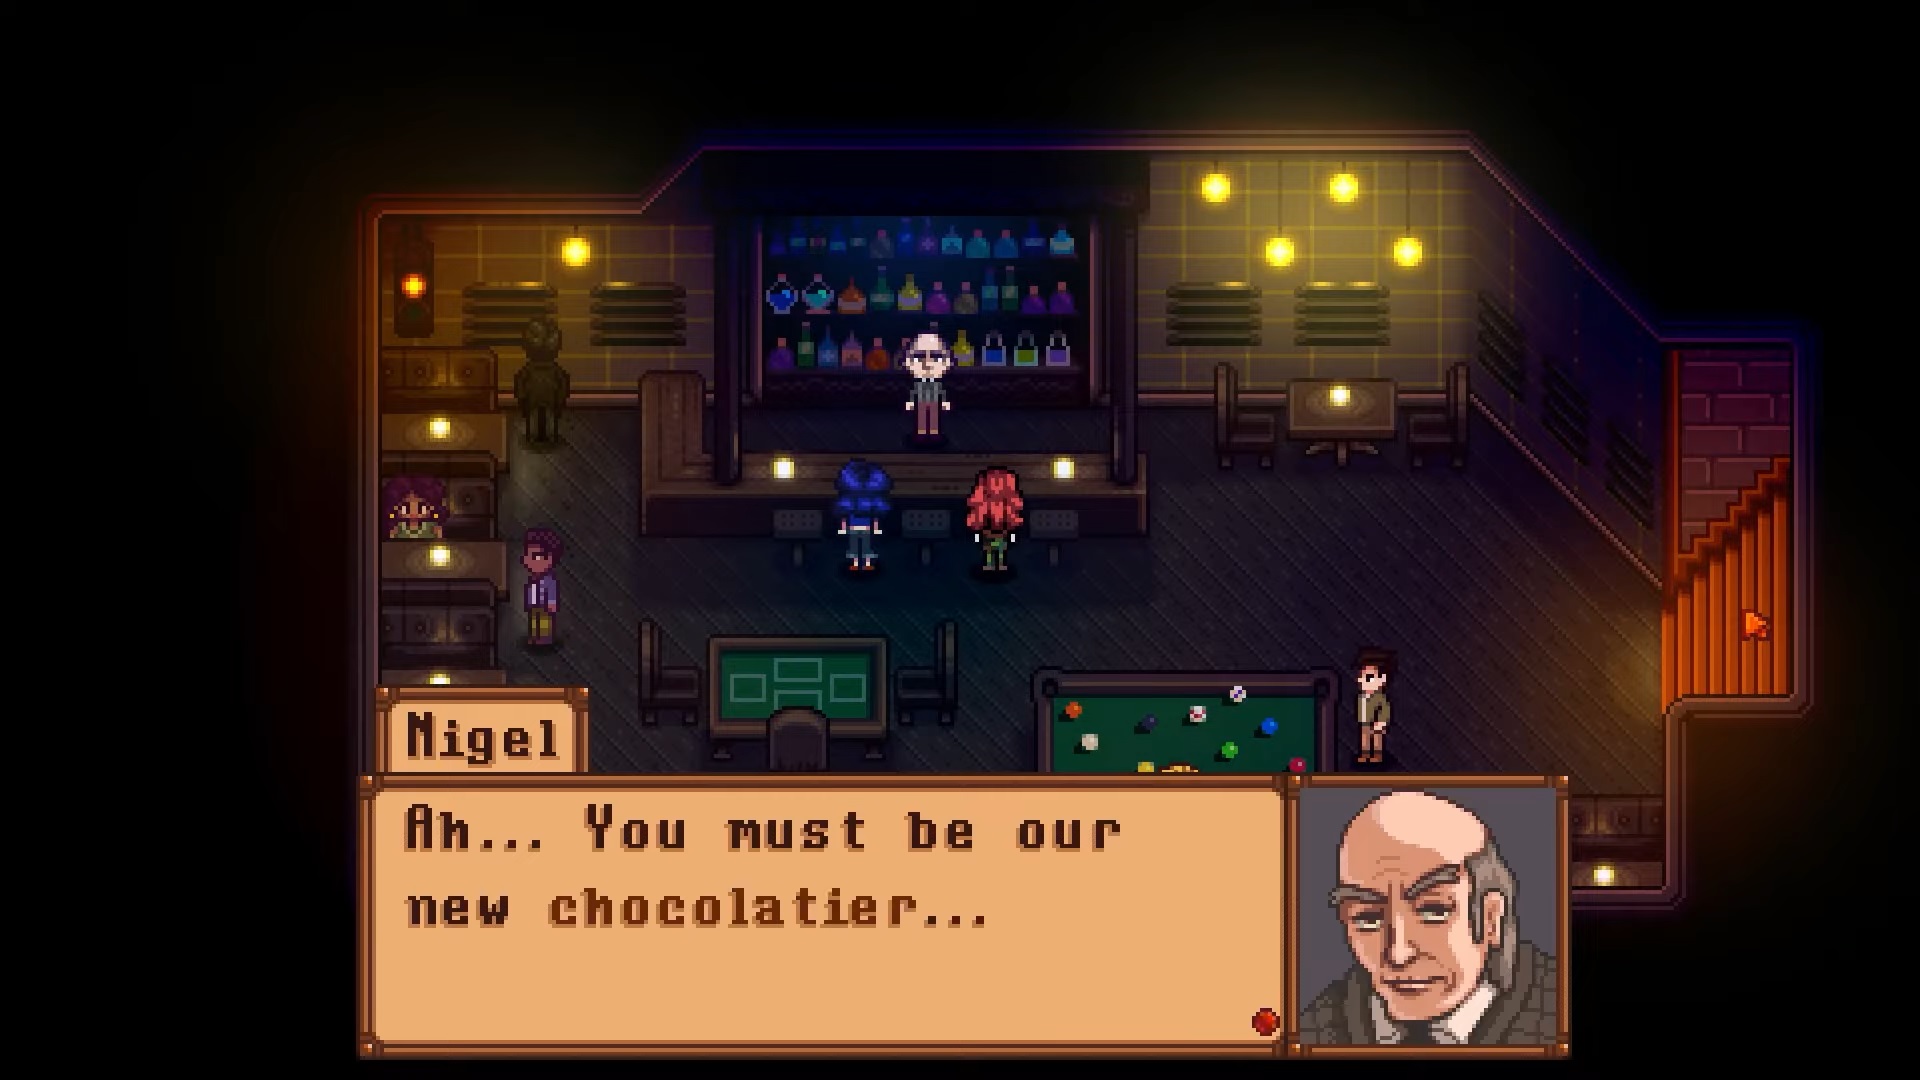 ConcernedApe’s Haunted Chocolatier, a new game by Stardew Valley creator